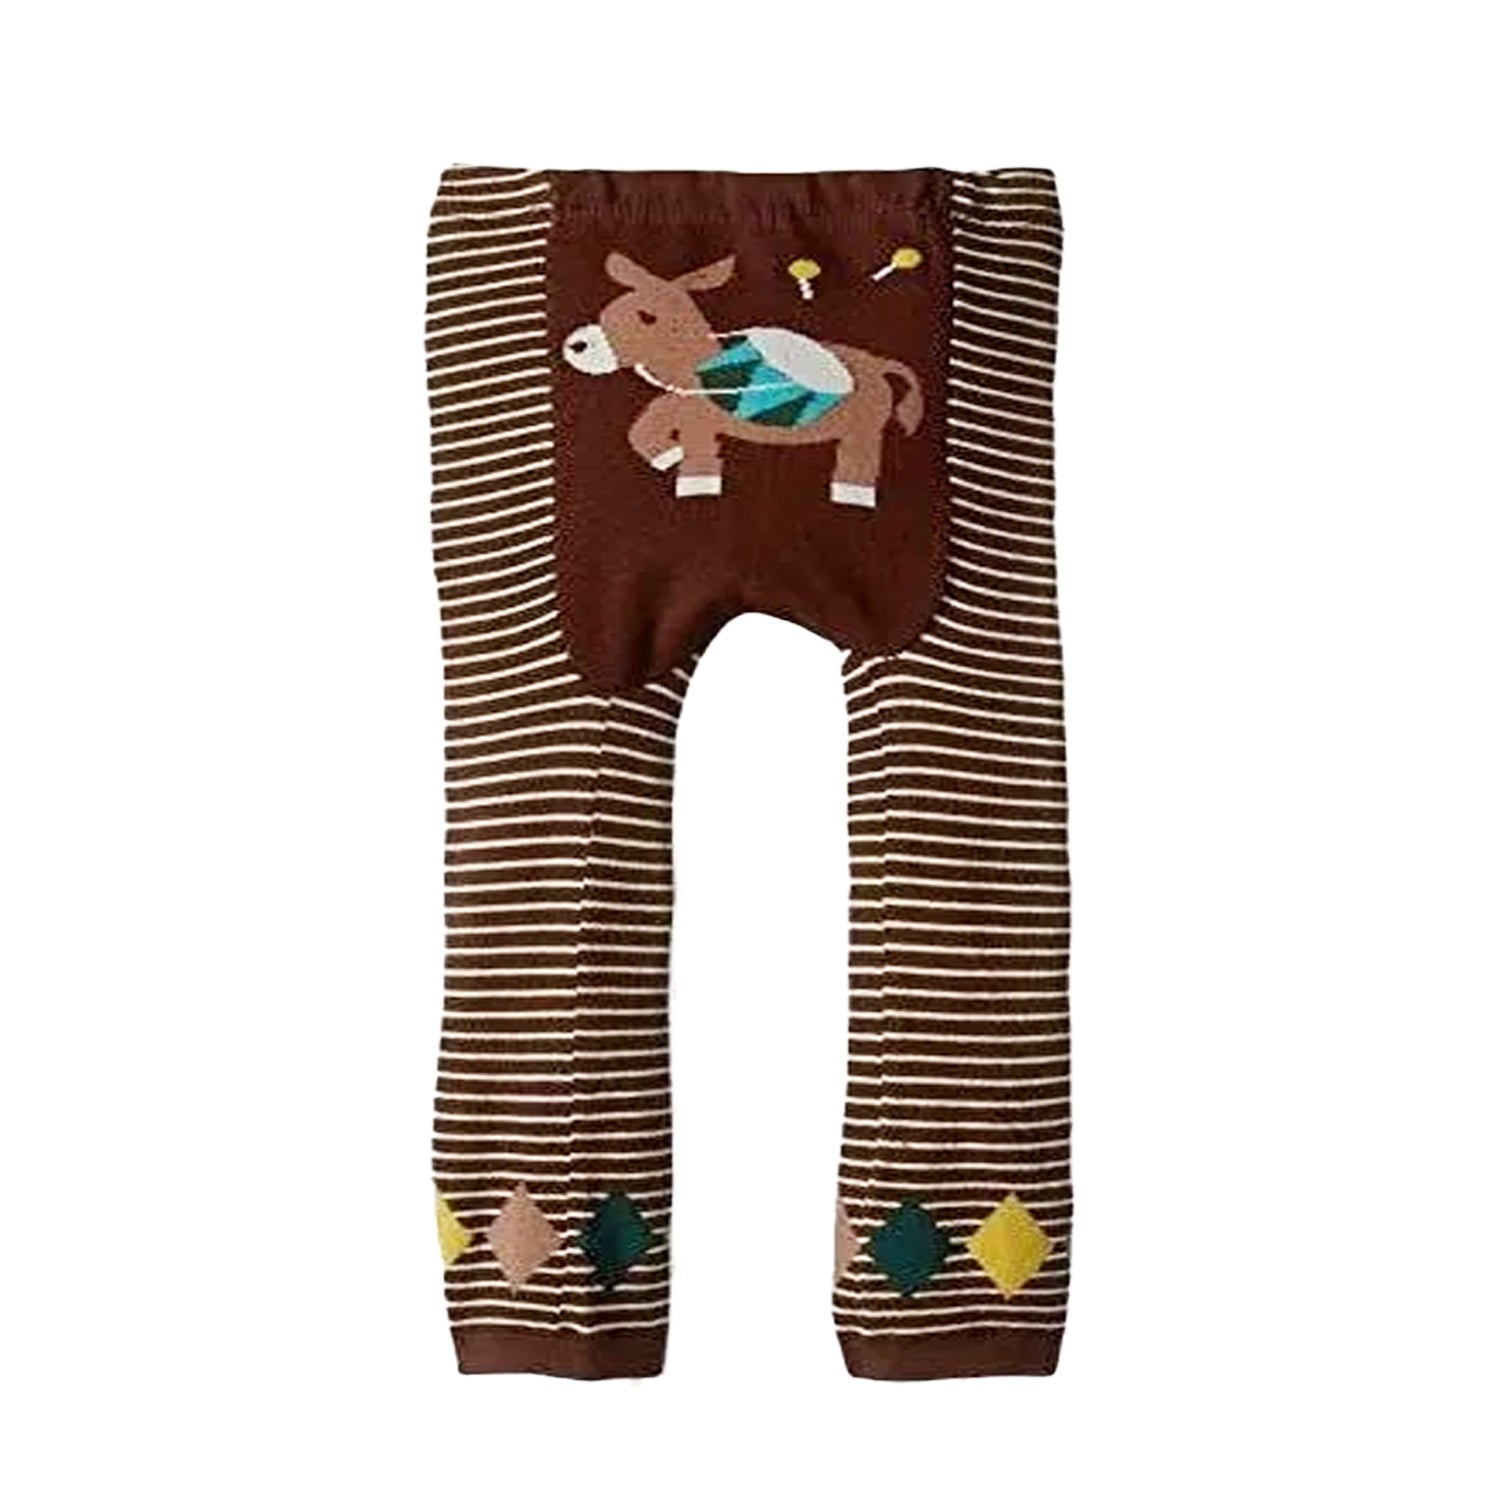 Wrapables Baby and Toddler Animal Leggings (Set of 3), 6 to 12 months, Pink and Brown